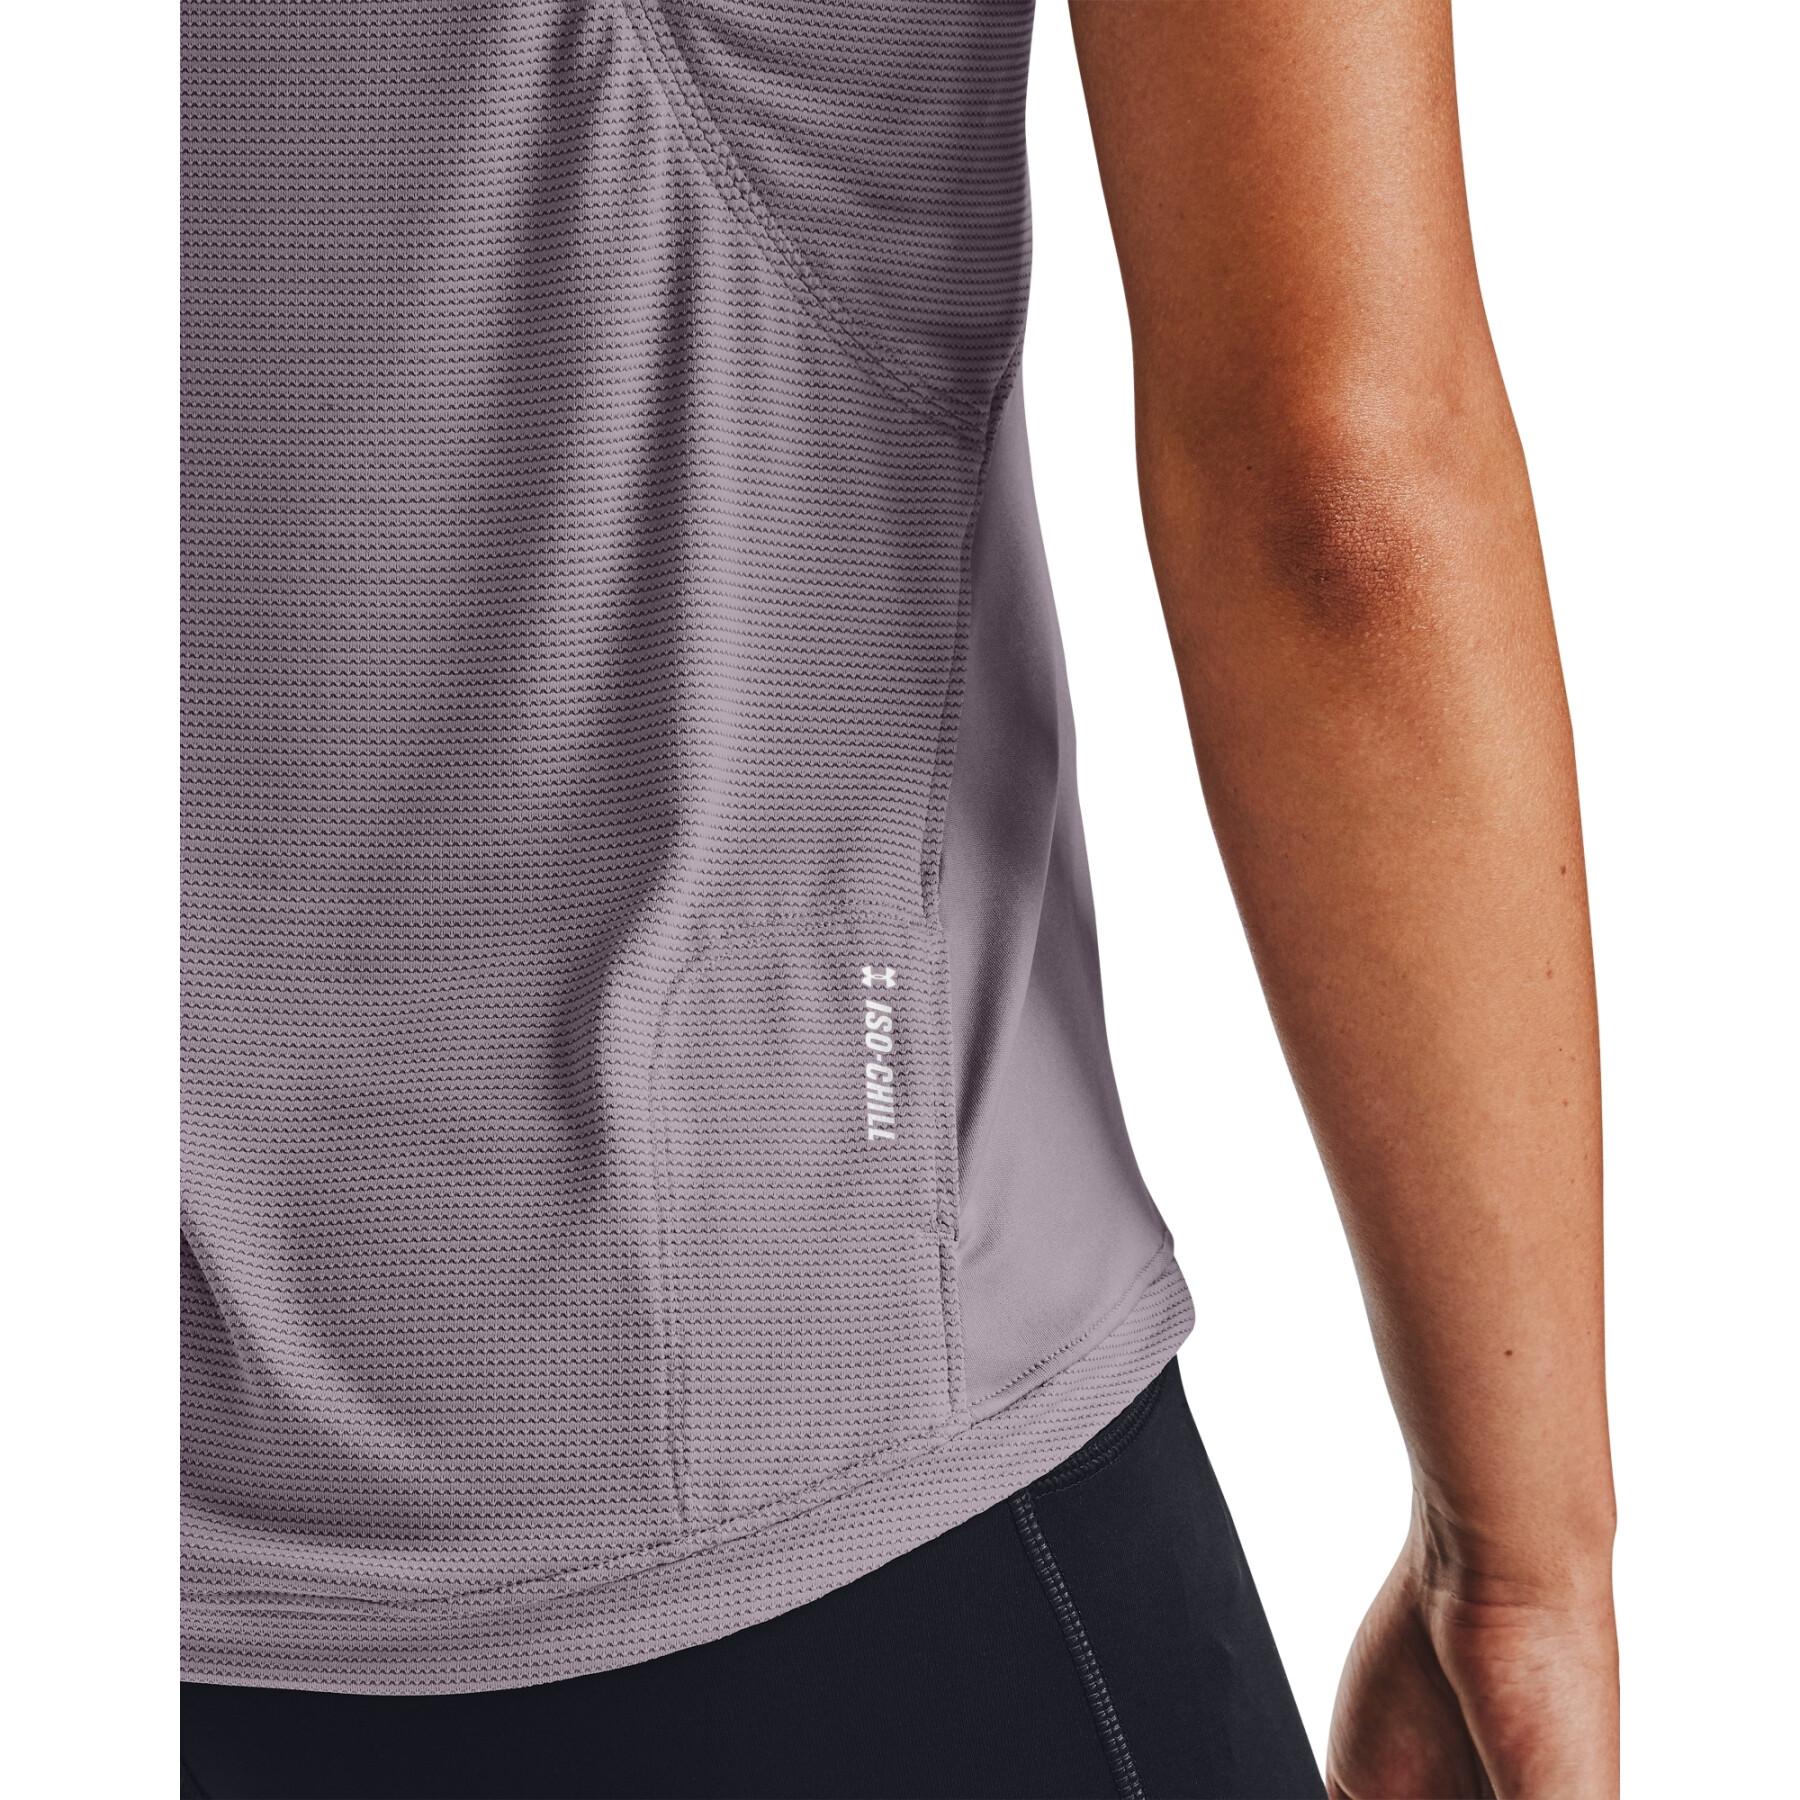 Women's jersey Under Armour Qualifier Iso-Chill